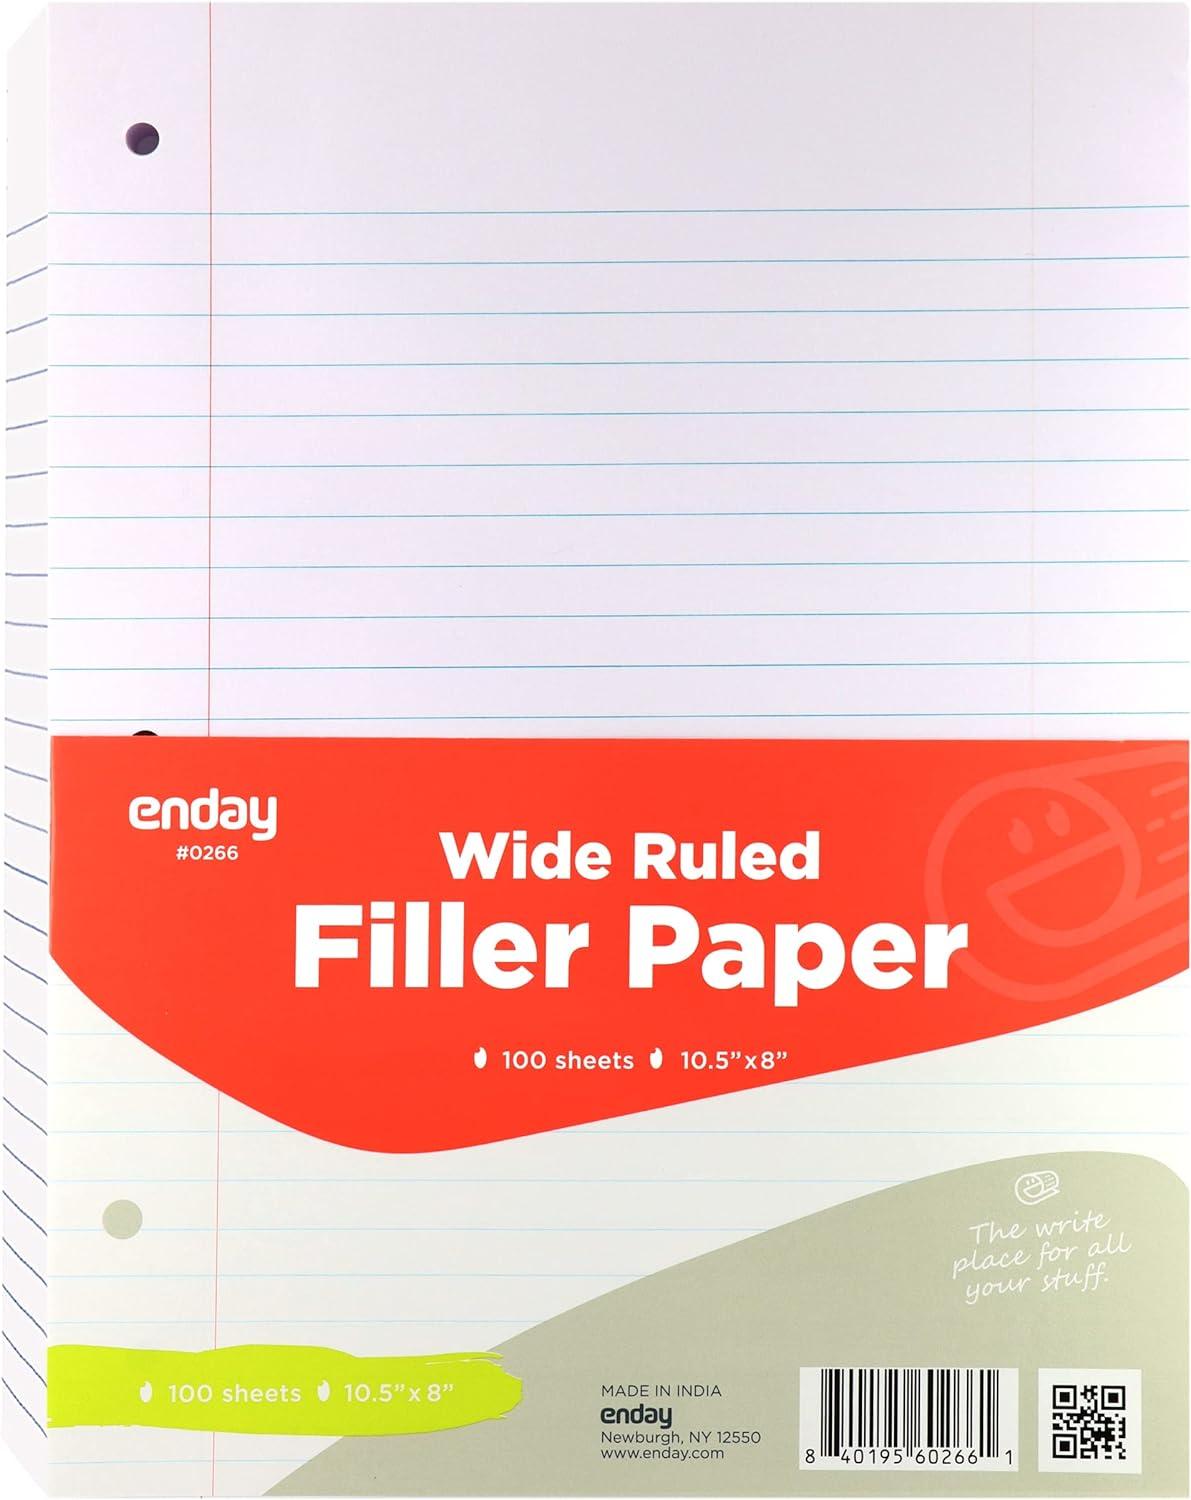 emraw wide ruled filler paper perfect for normal everyday notetaking 8  emraw b08jx9z7kk